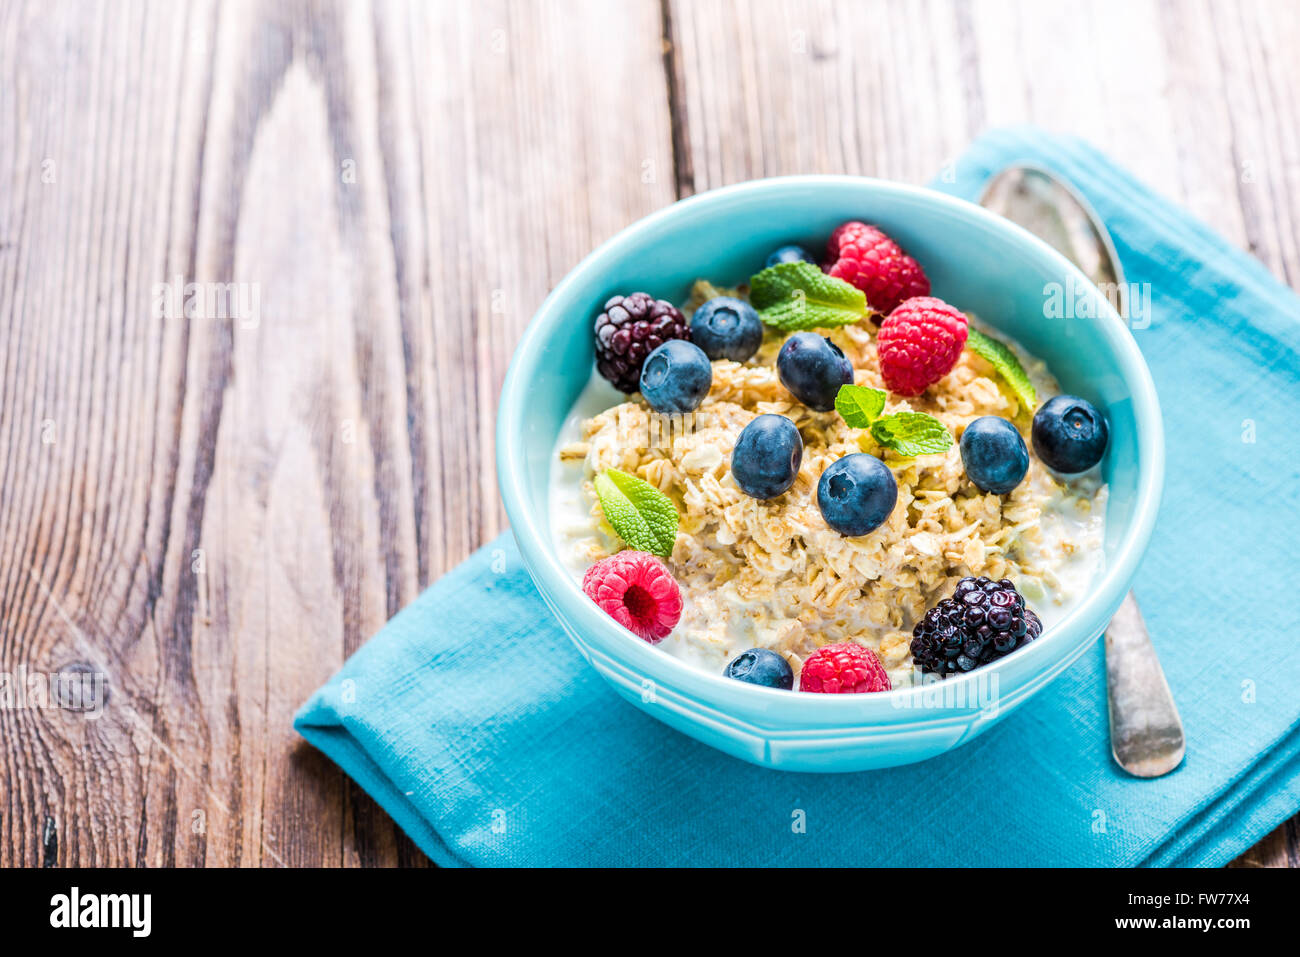 Tasty and light diet cereal breakfast with sumer fruits, fresh milk and honey. Diet concept and wellbeing. Stock Photo